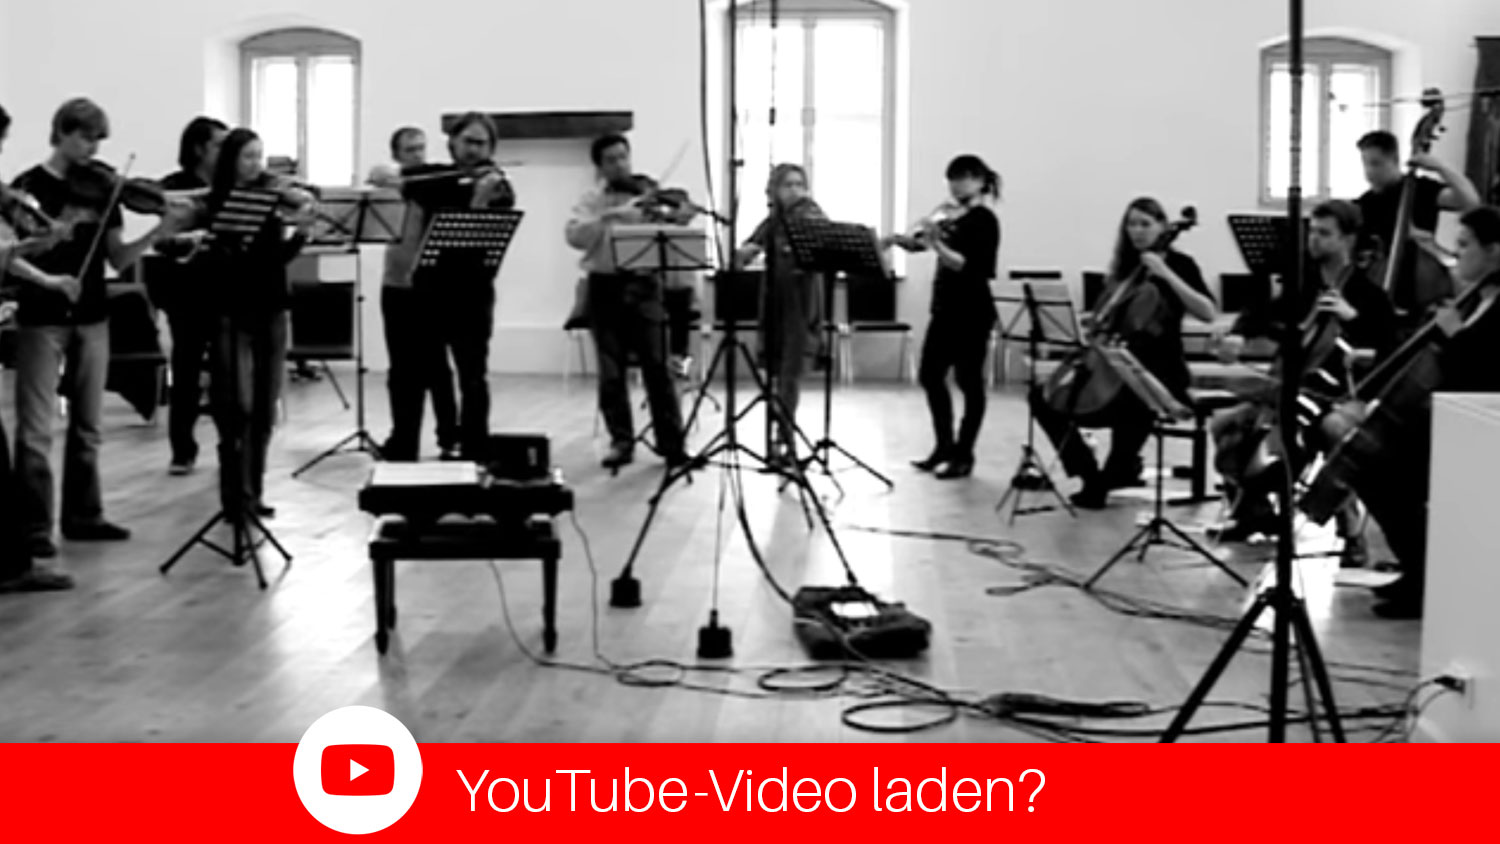 YouTube Video dogma chamber orchestra